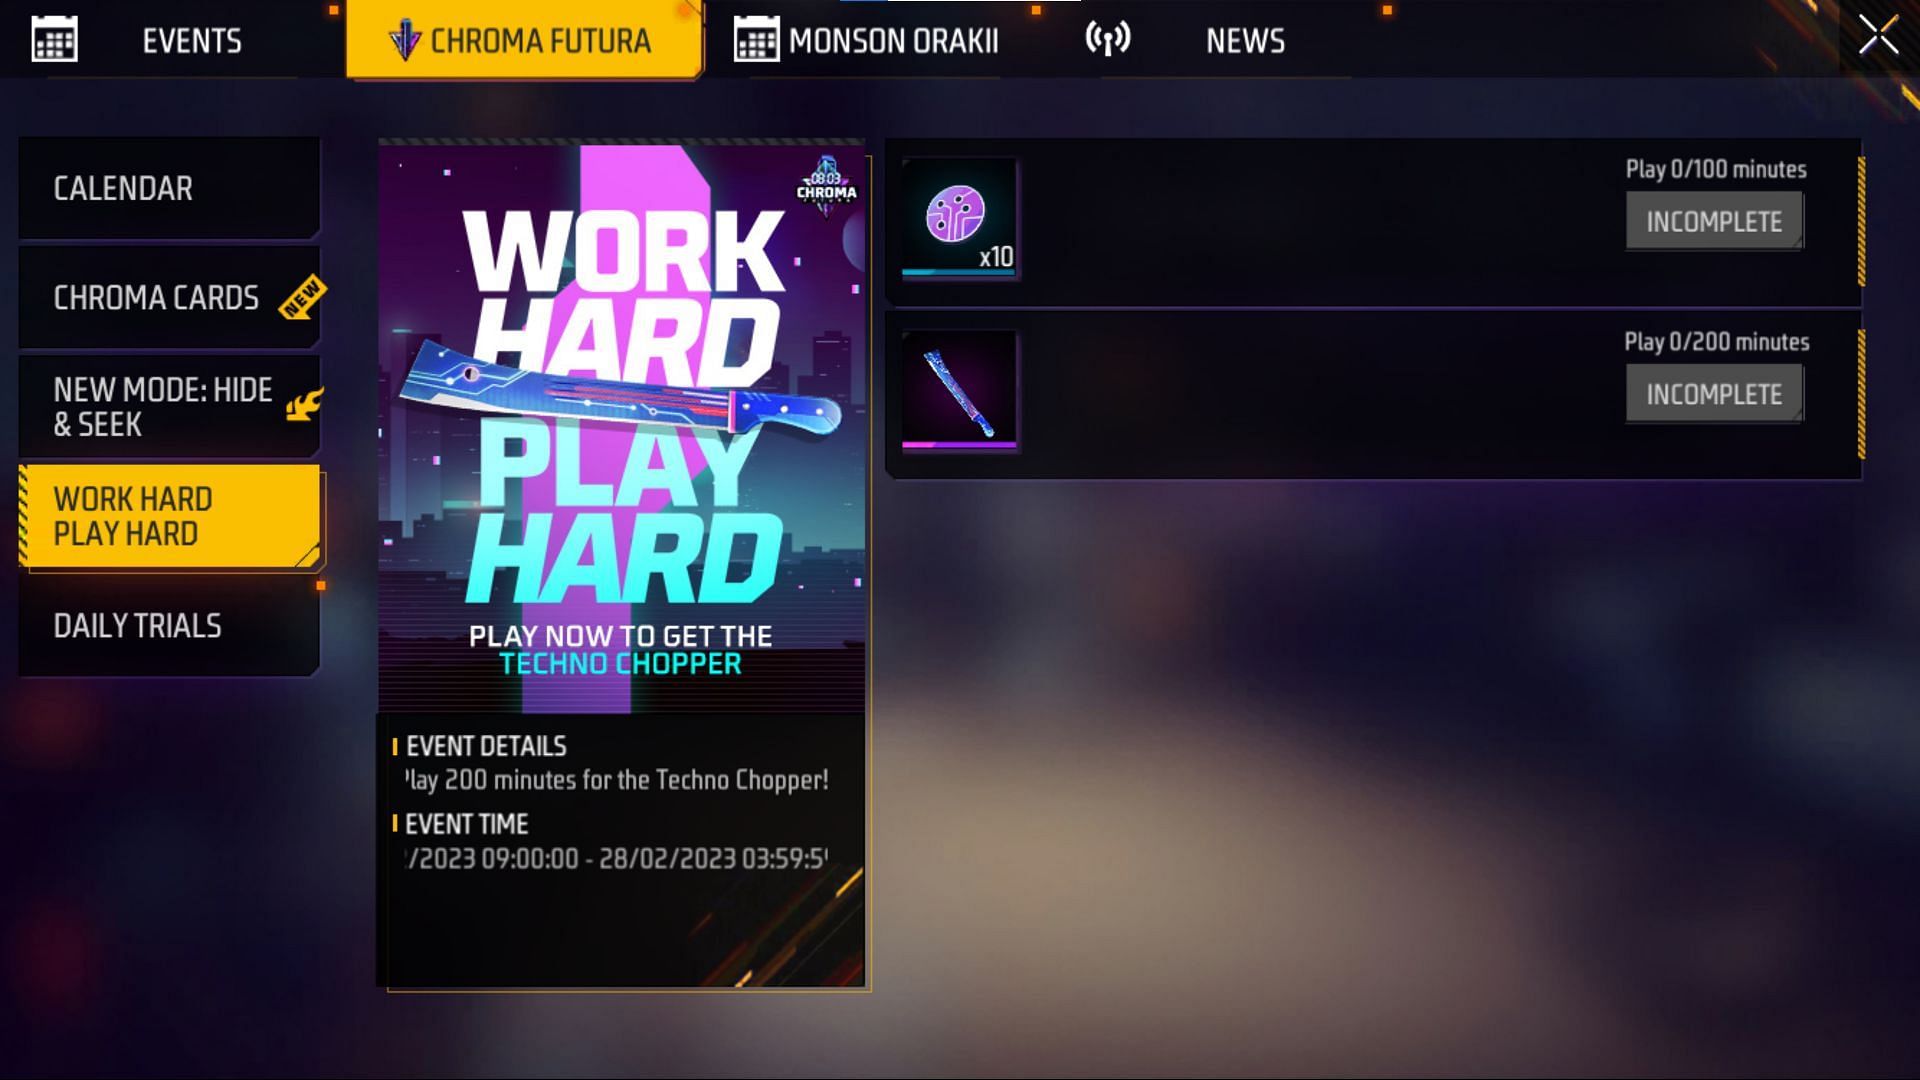 Work Hard Play Hard is another event active within the game (Image via Garena)